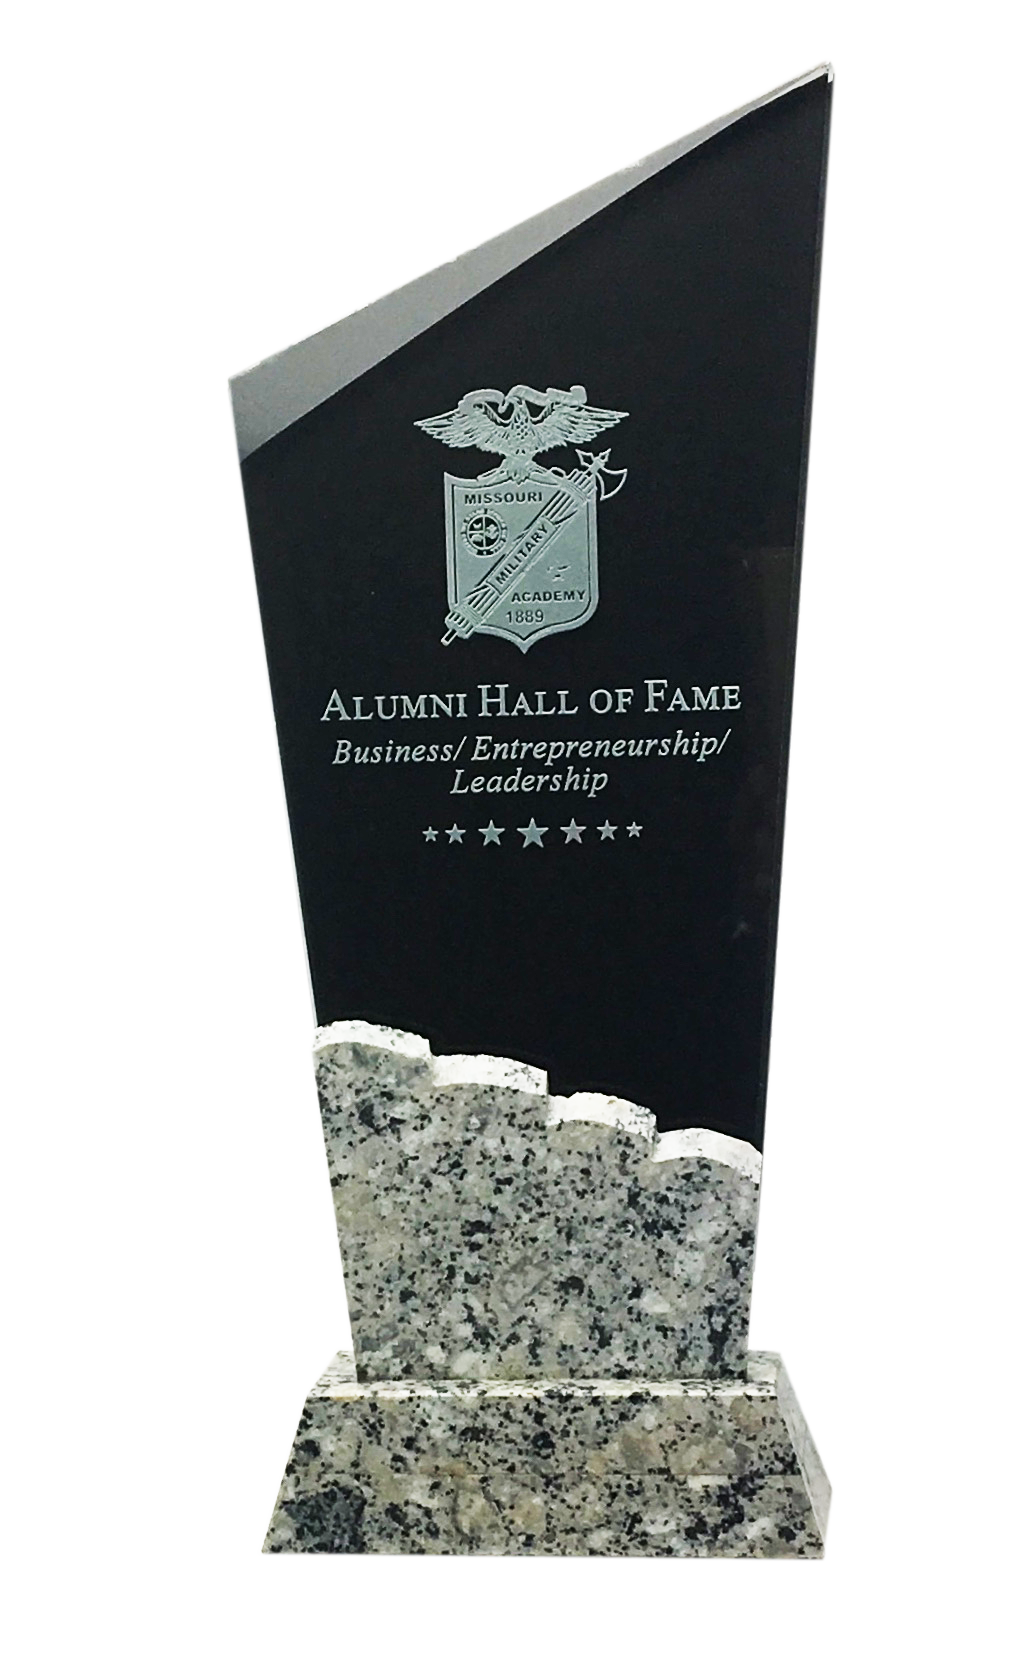 New Alumni Hall of Fame Awards Introduced during 2019 News